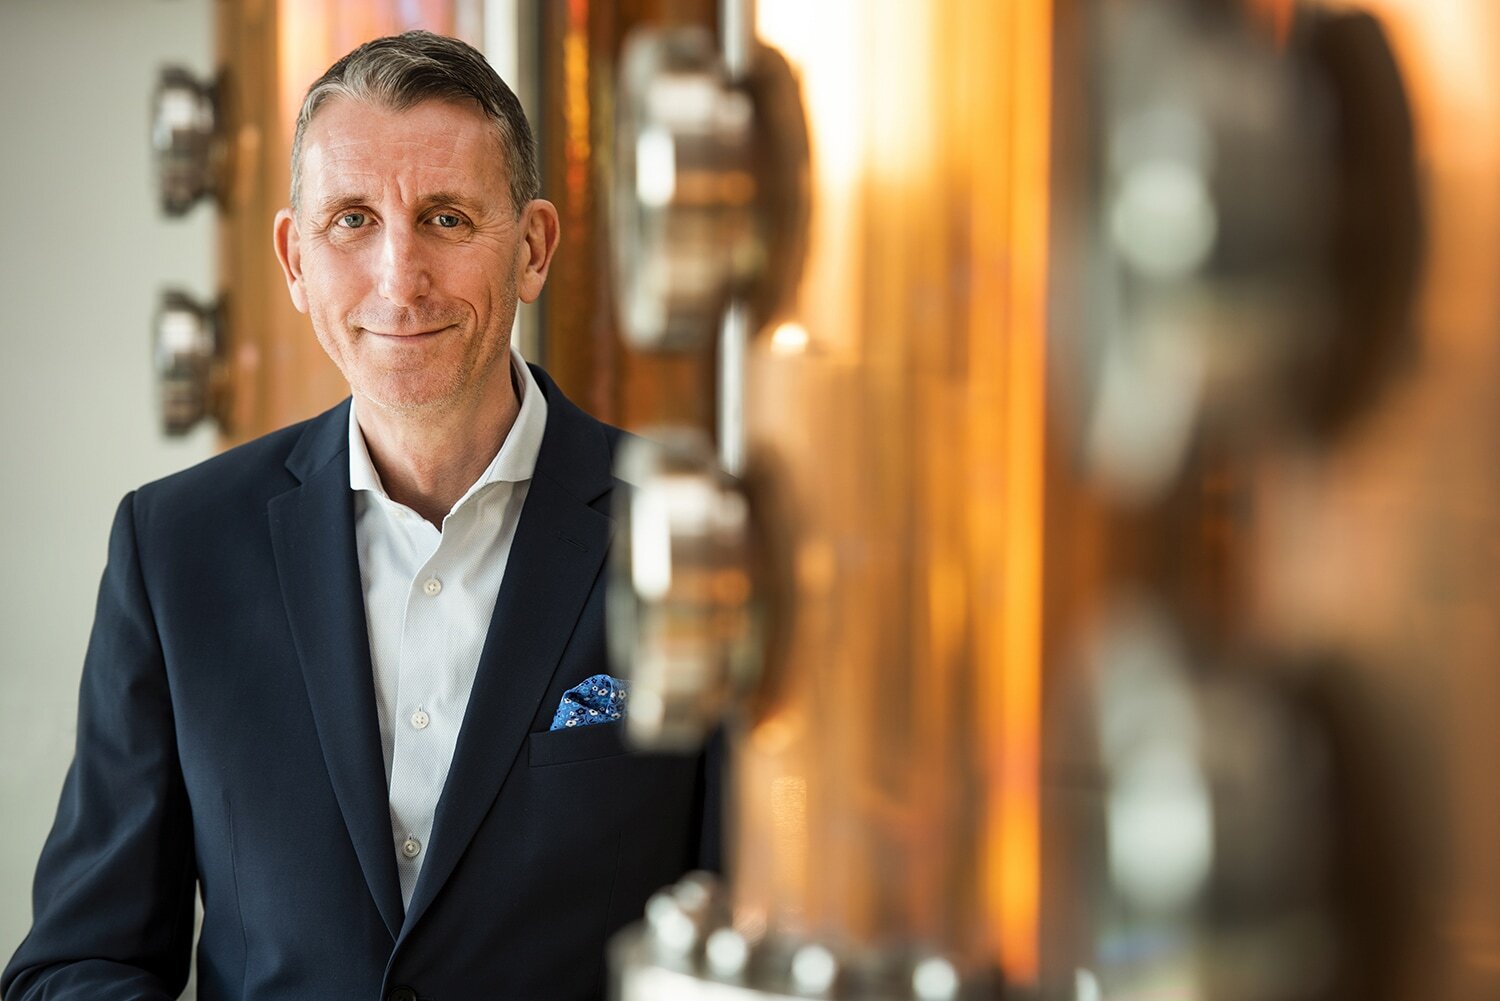 Adnams’ chief executive Andy Wood on how the pubco is shifting its focus from selling rooms to promoting the assets of East Anglia